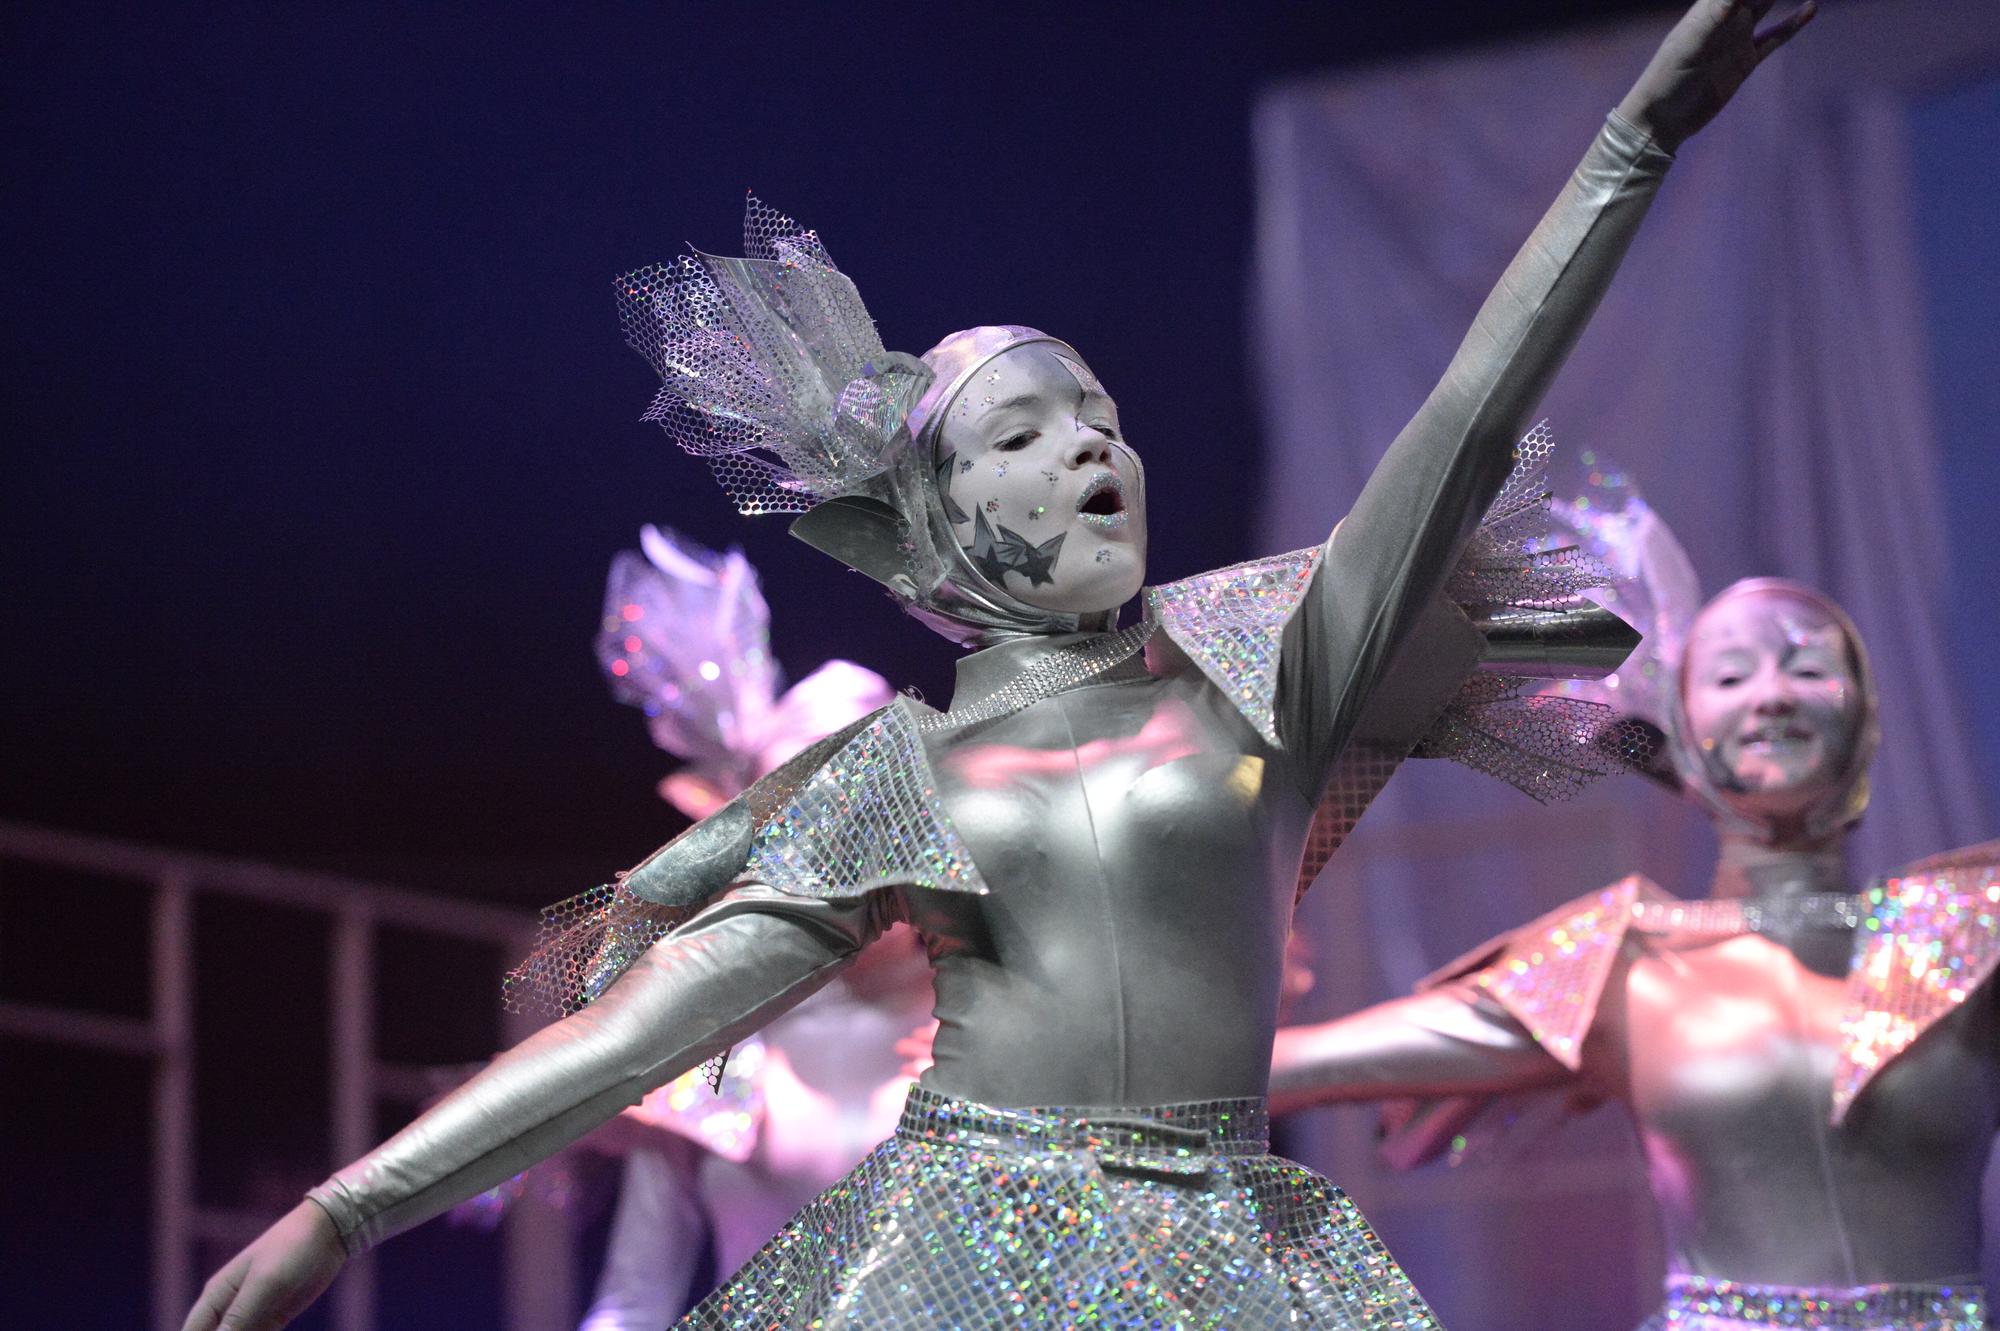 One of the Peterhead participants from a previous Rock Challenge performance